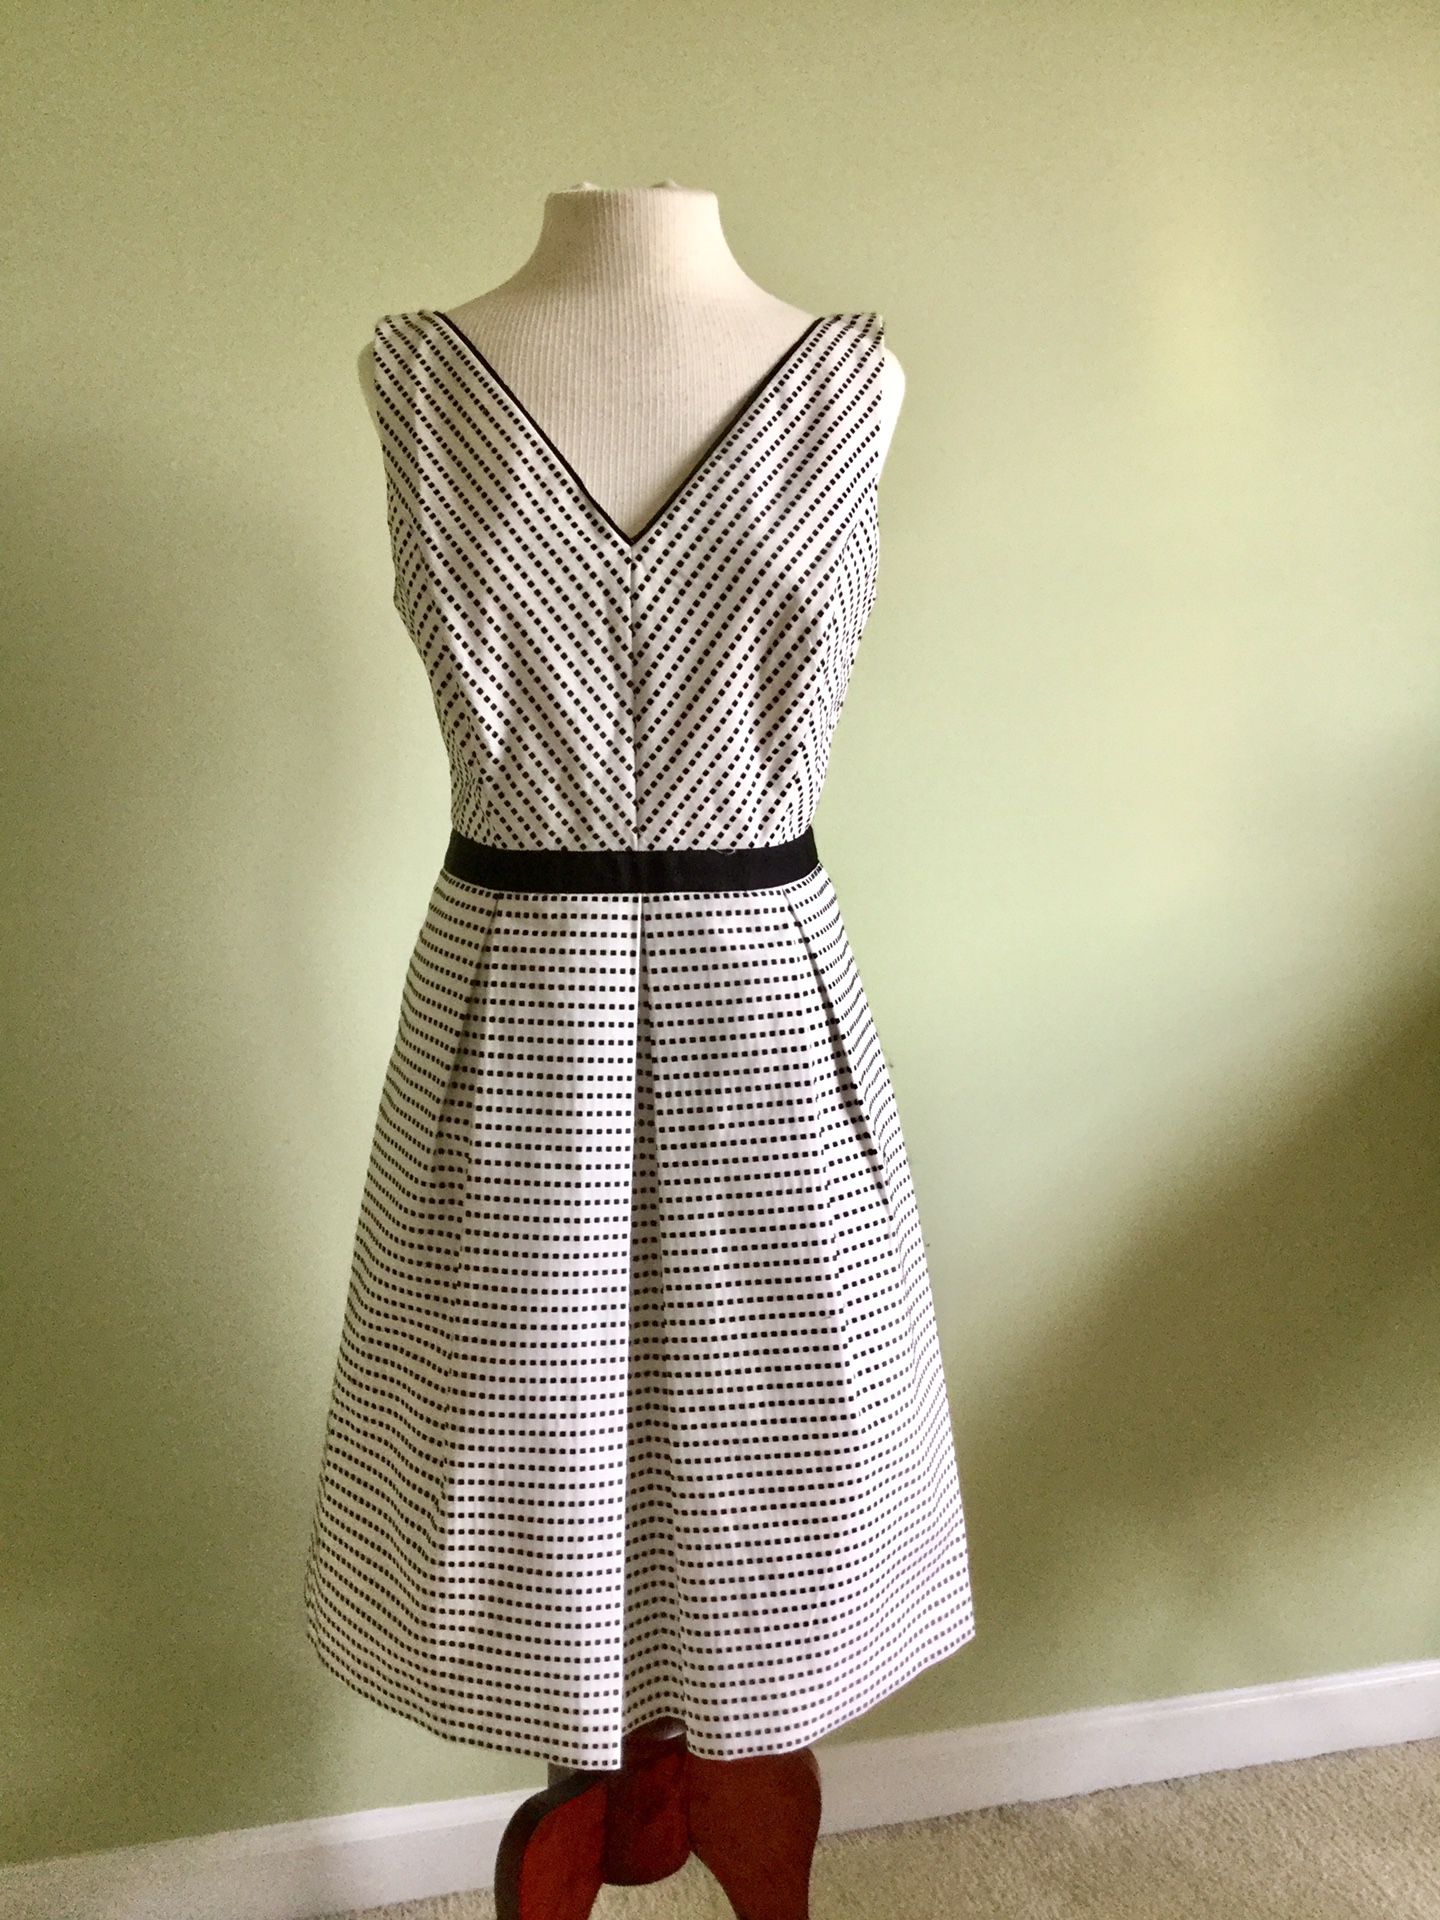 White House Black Market Black and White Spotted Dress Size 6